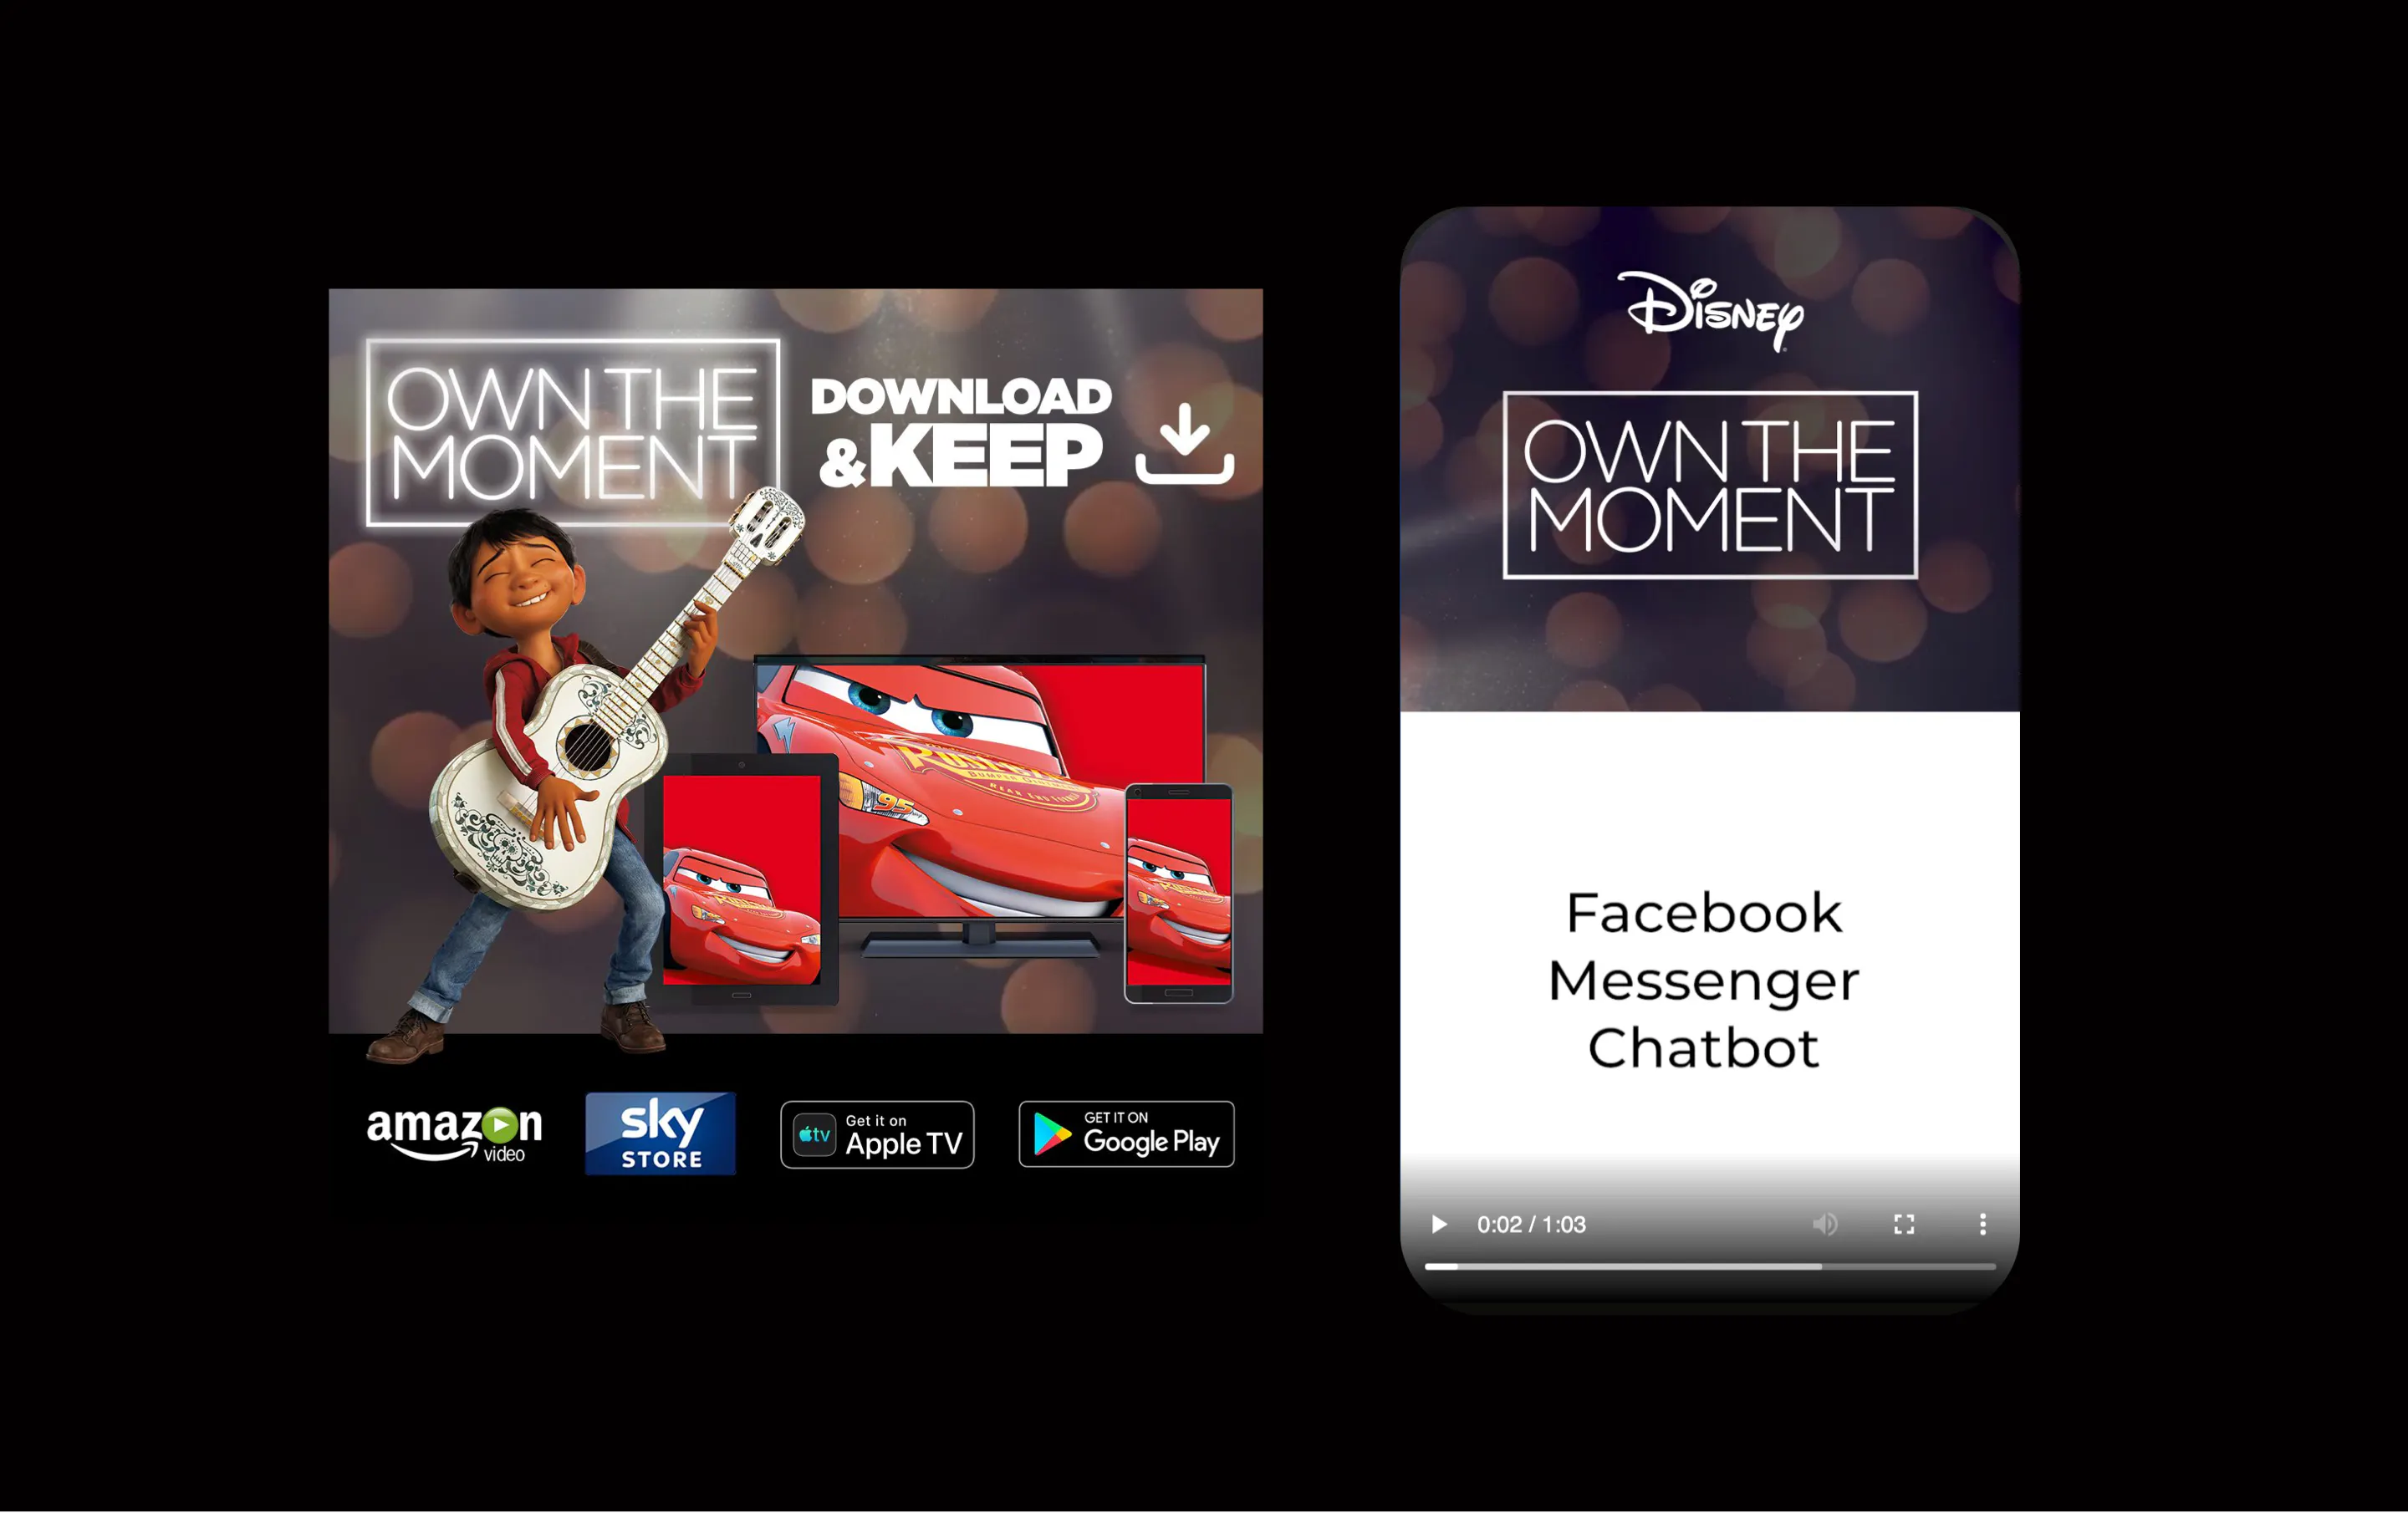 Disney Own The Moment Facebook Chatbot